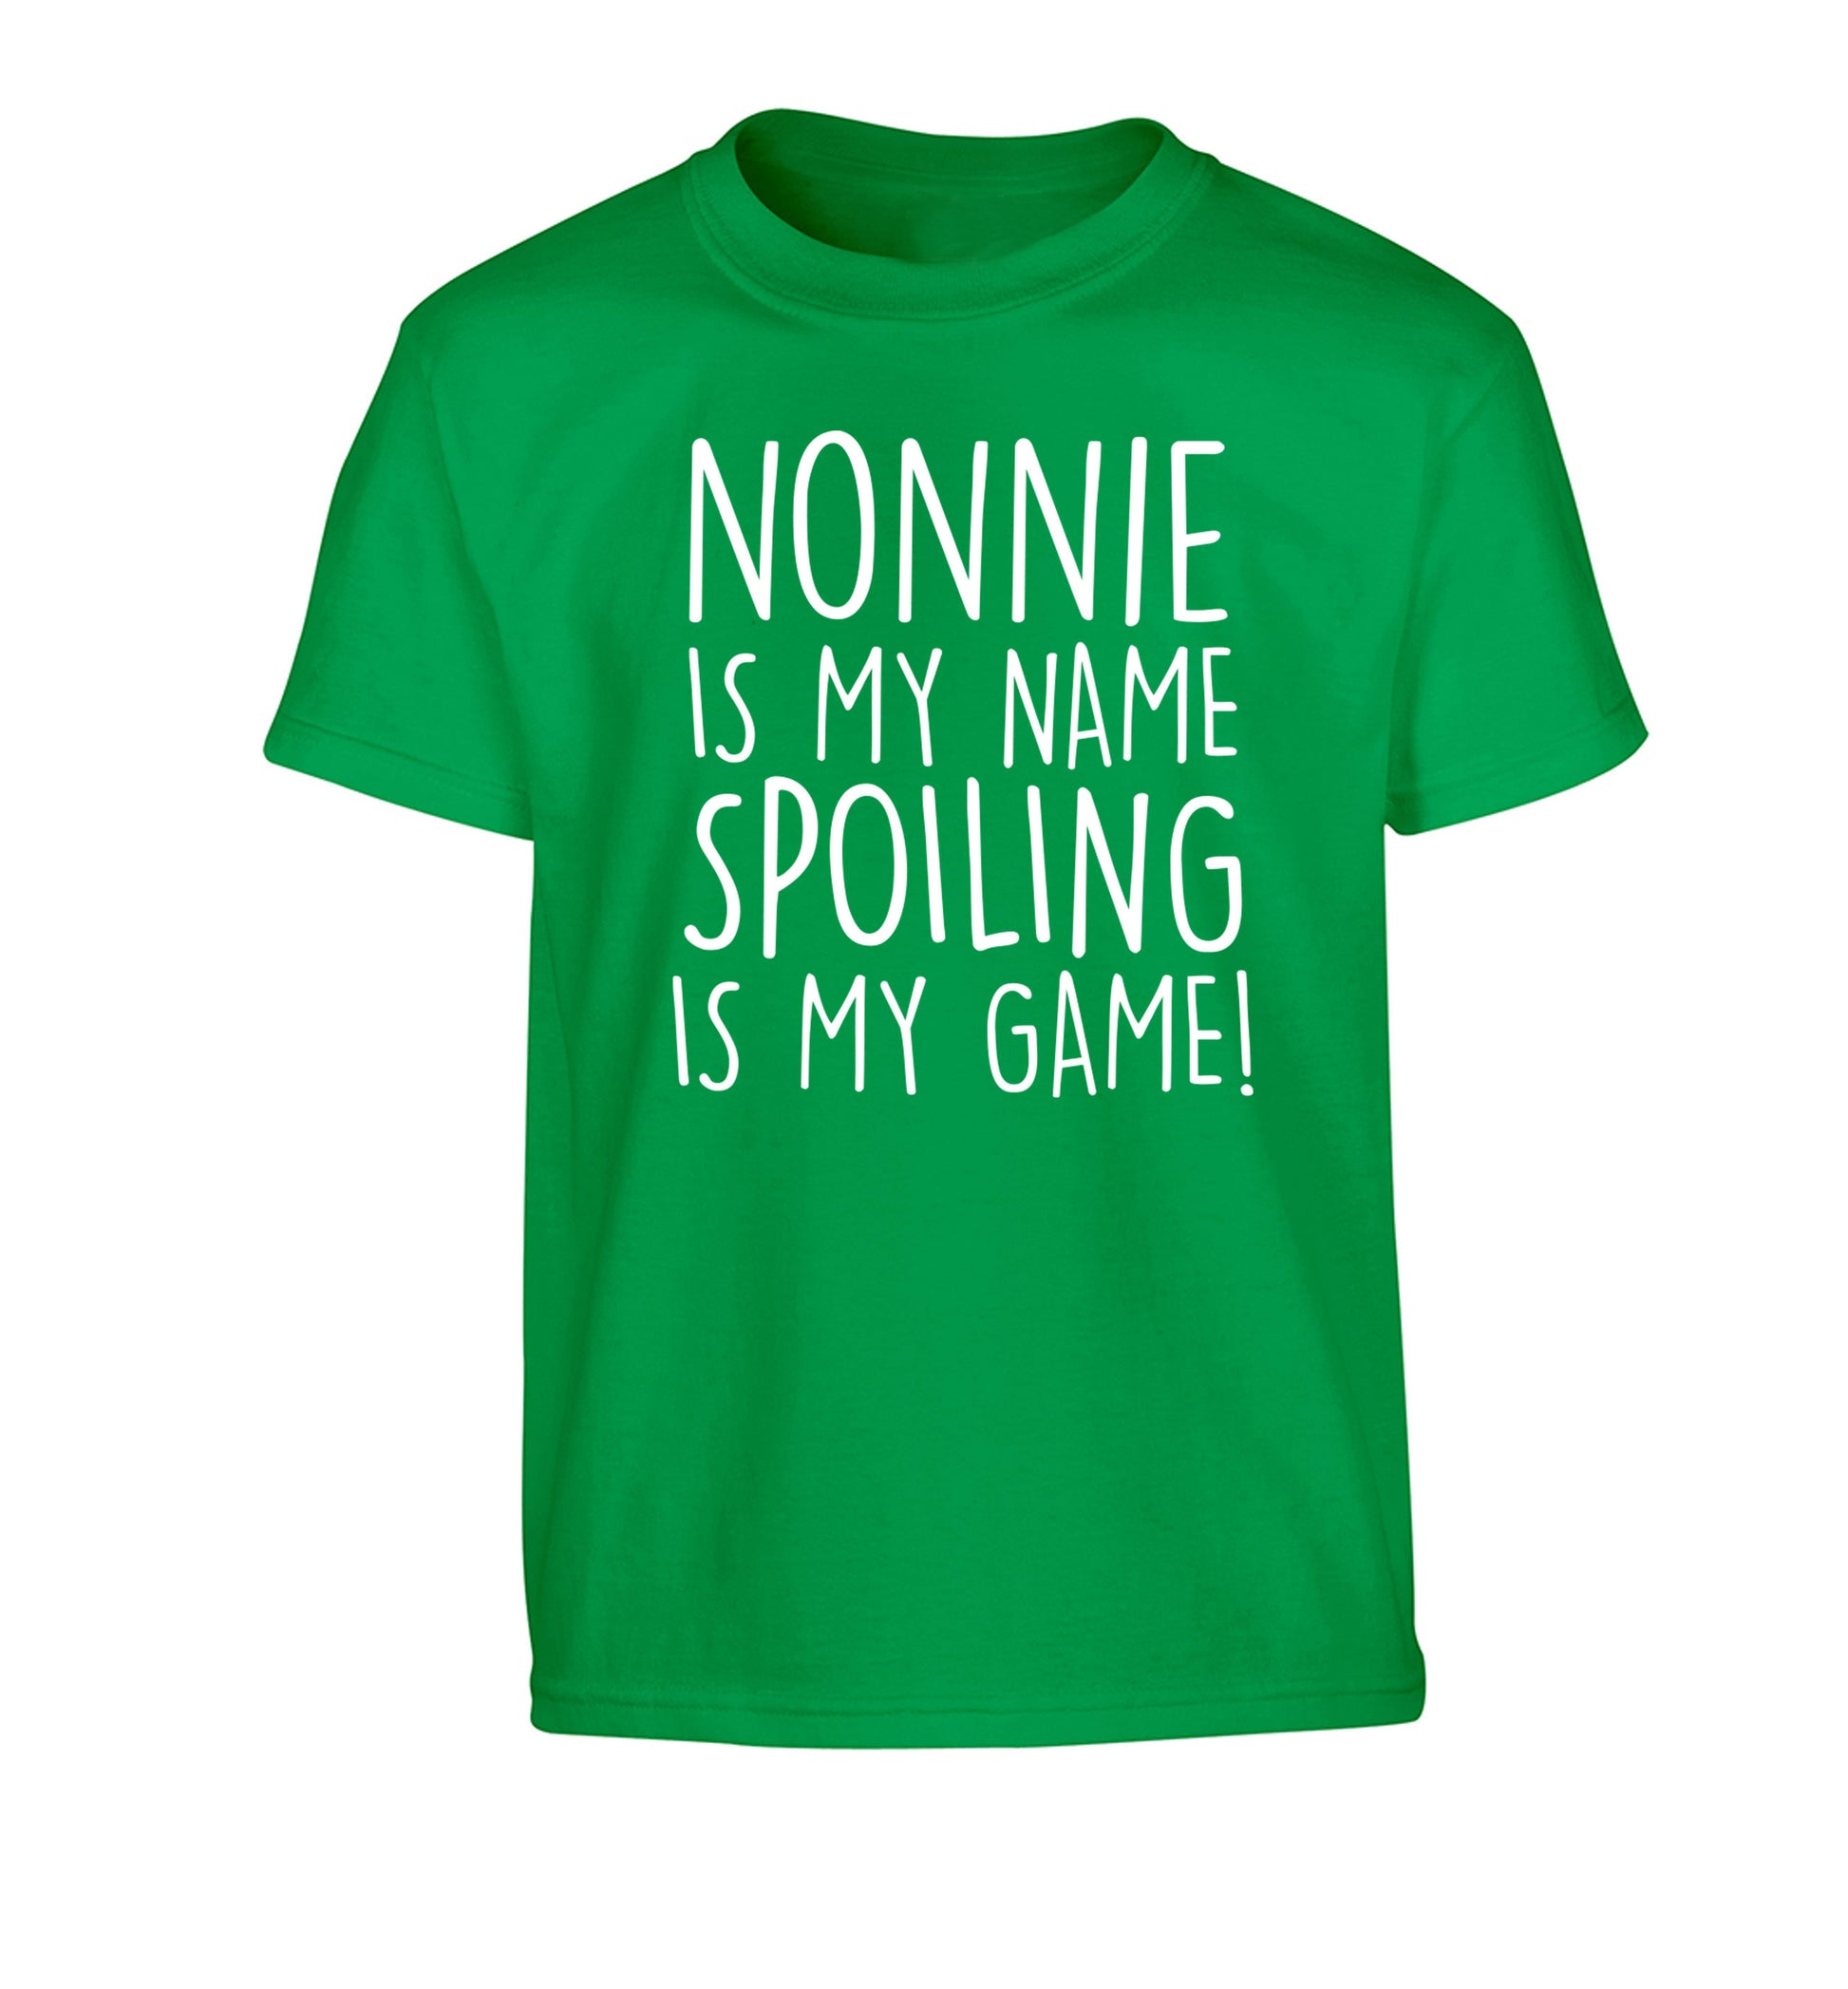 Nonnie is my name, spoiling is my game Children's green Tshirt 12-14 Years